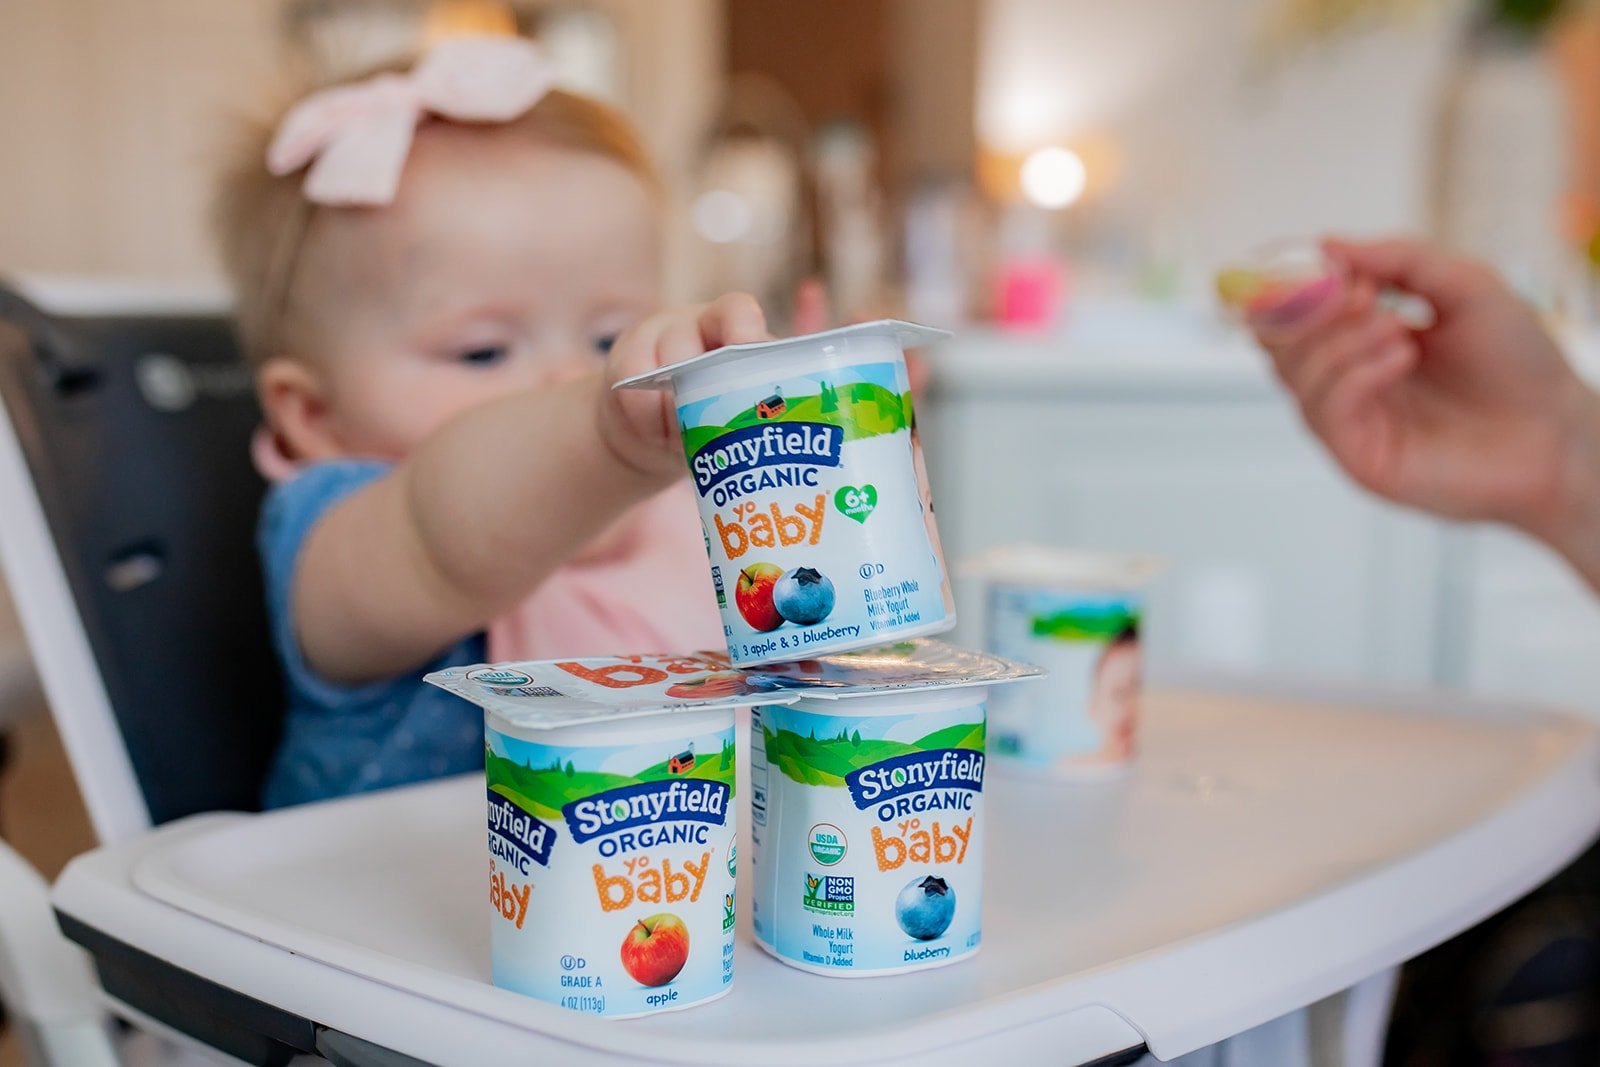 Baby girl reaching out to Stonyfield yogurt cups on her high chair.